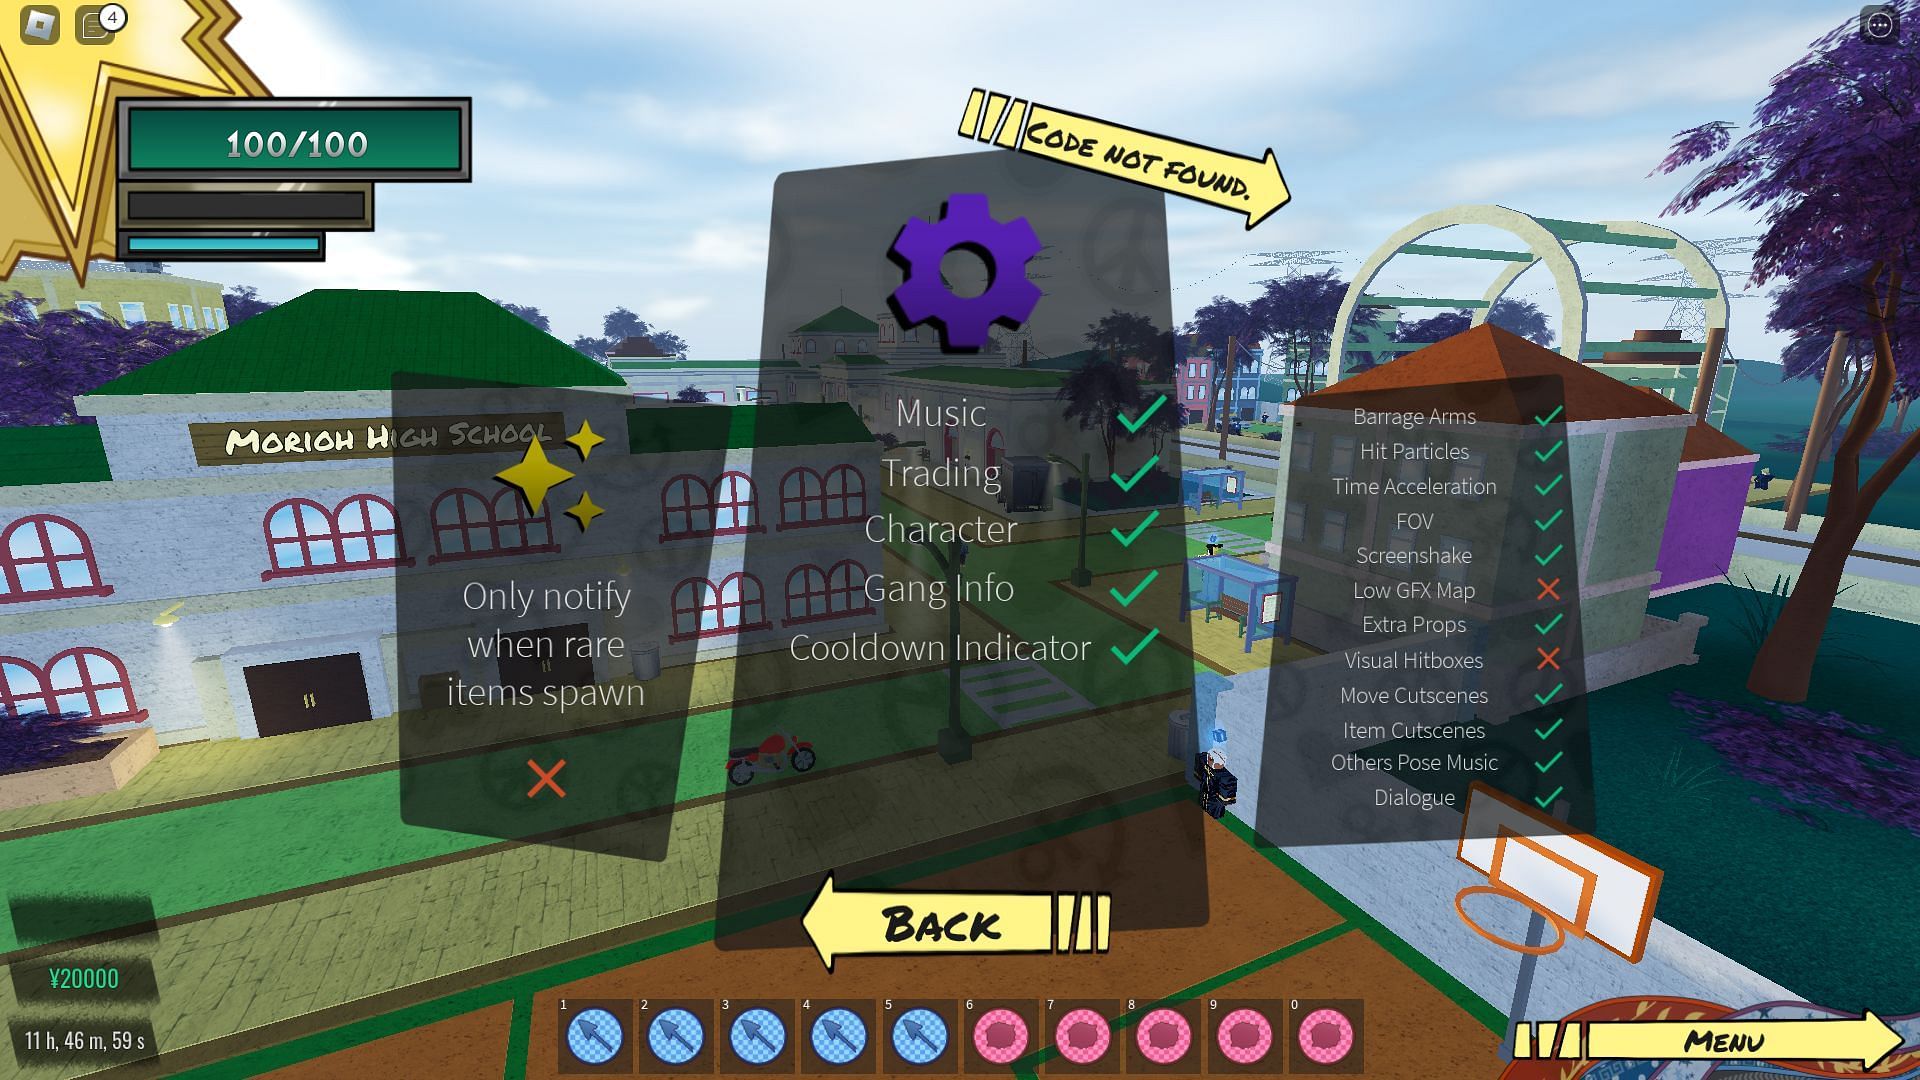 Troubleshooting codes for Project Menacing (Image via Roblox)